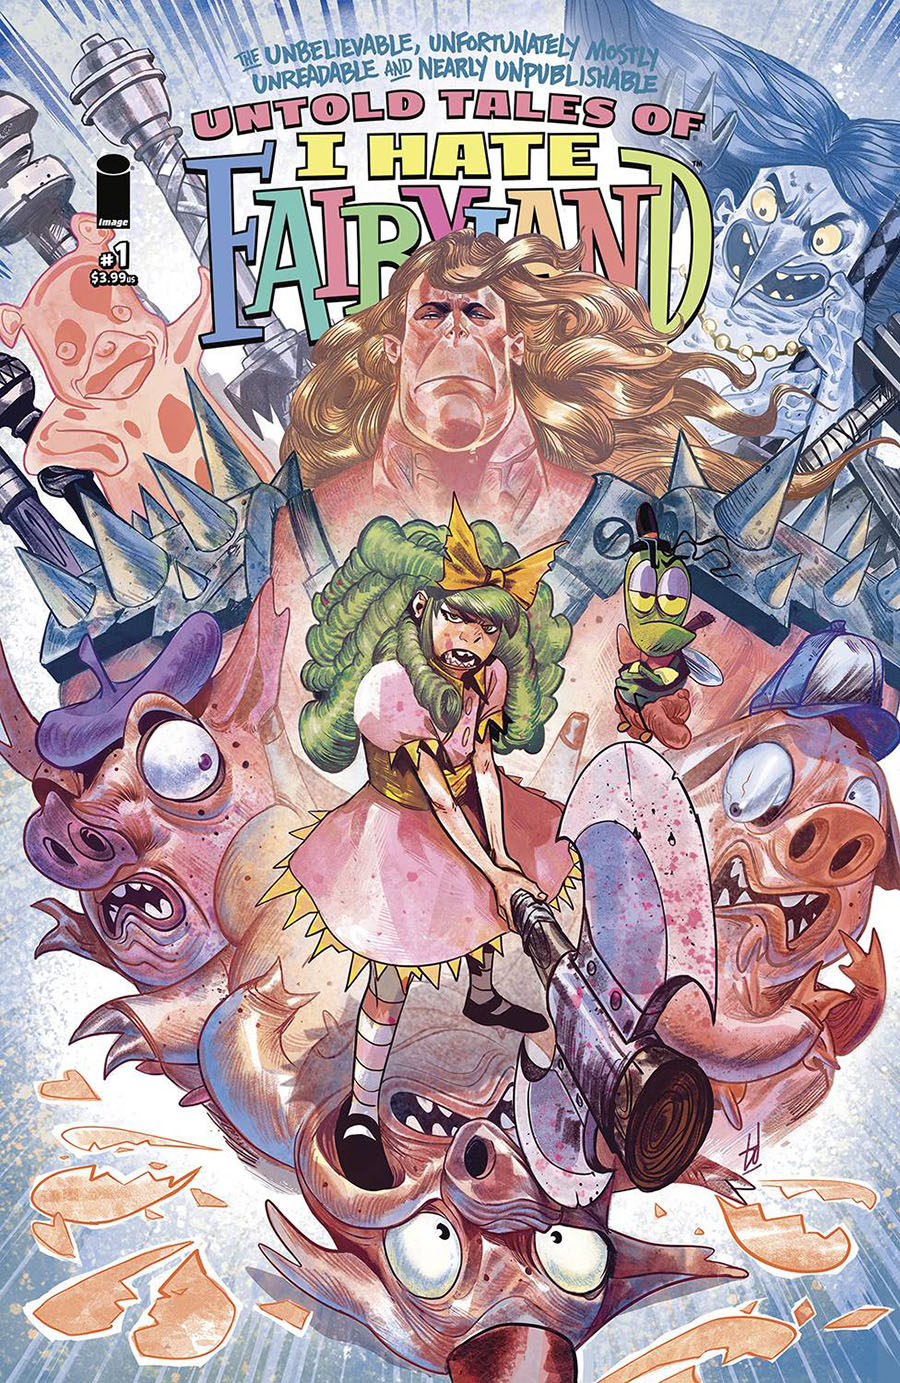 Unbelievable Unfortunately Mostly Unreadable And Nearly Unpublishable Untold Tales Of I Hate Fairyland #1 Cover A